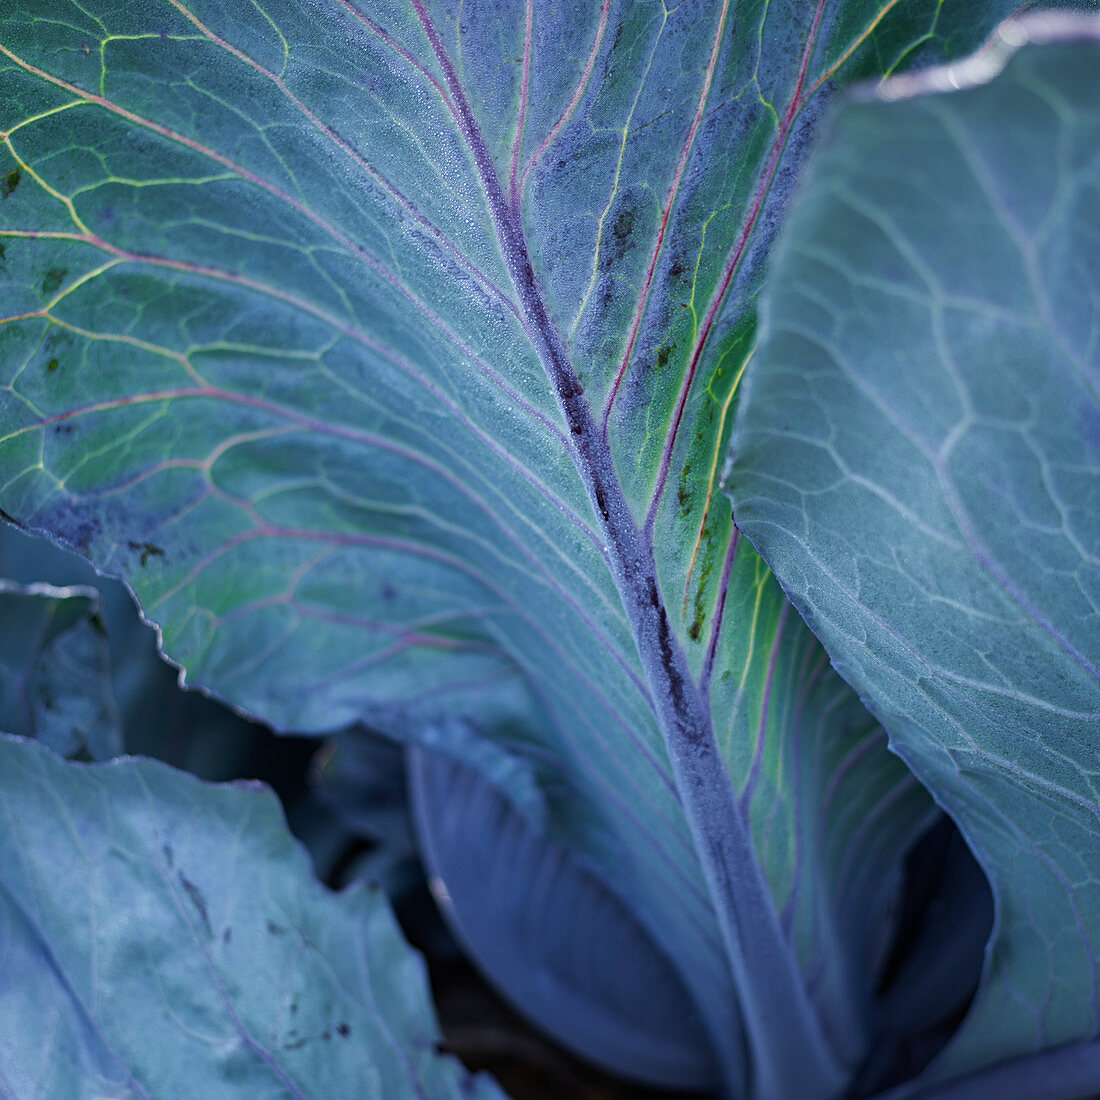 Red cabbage leaves (close-up)